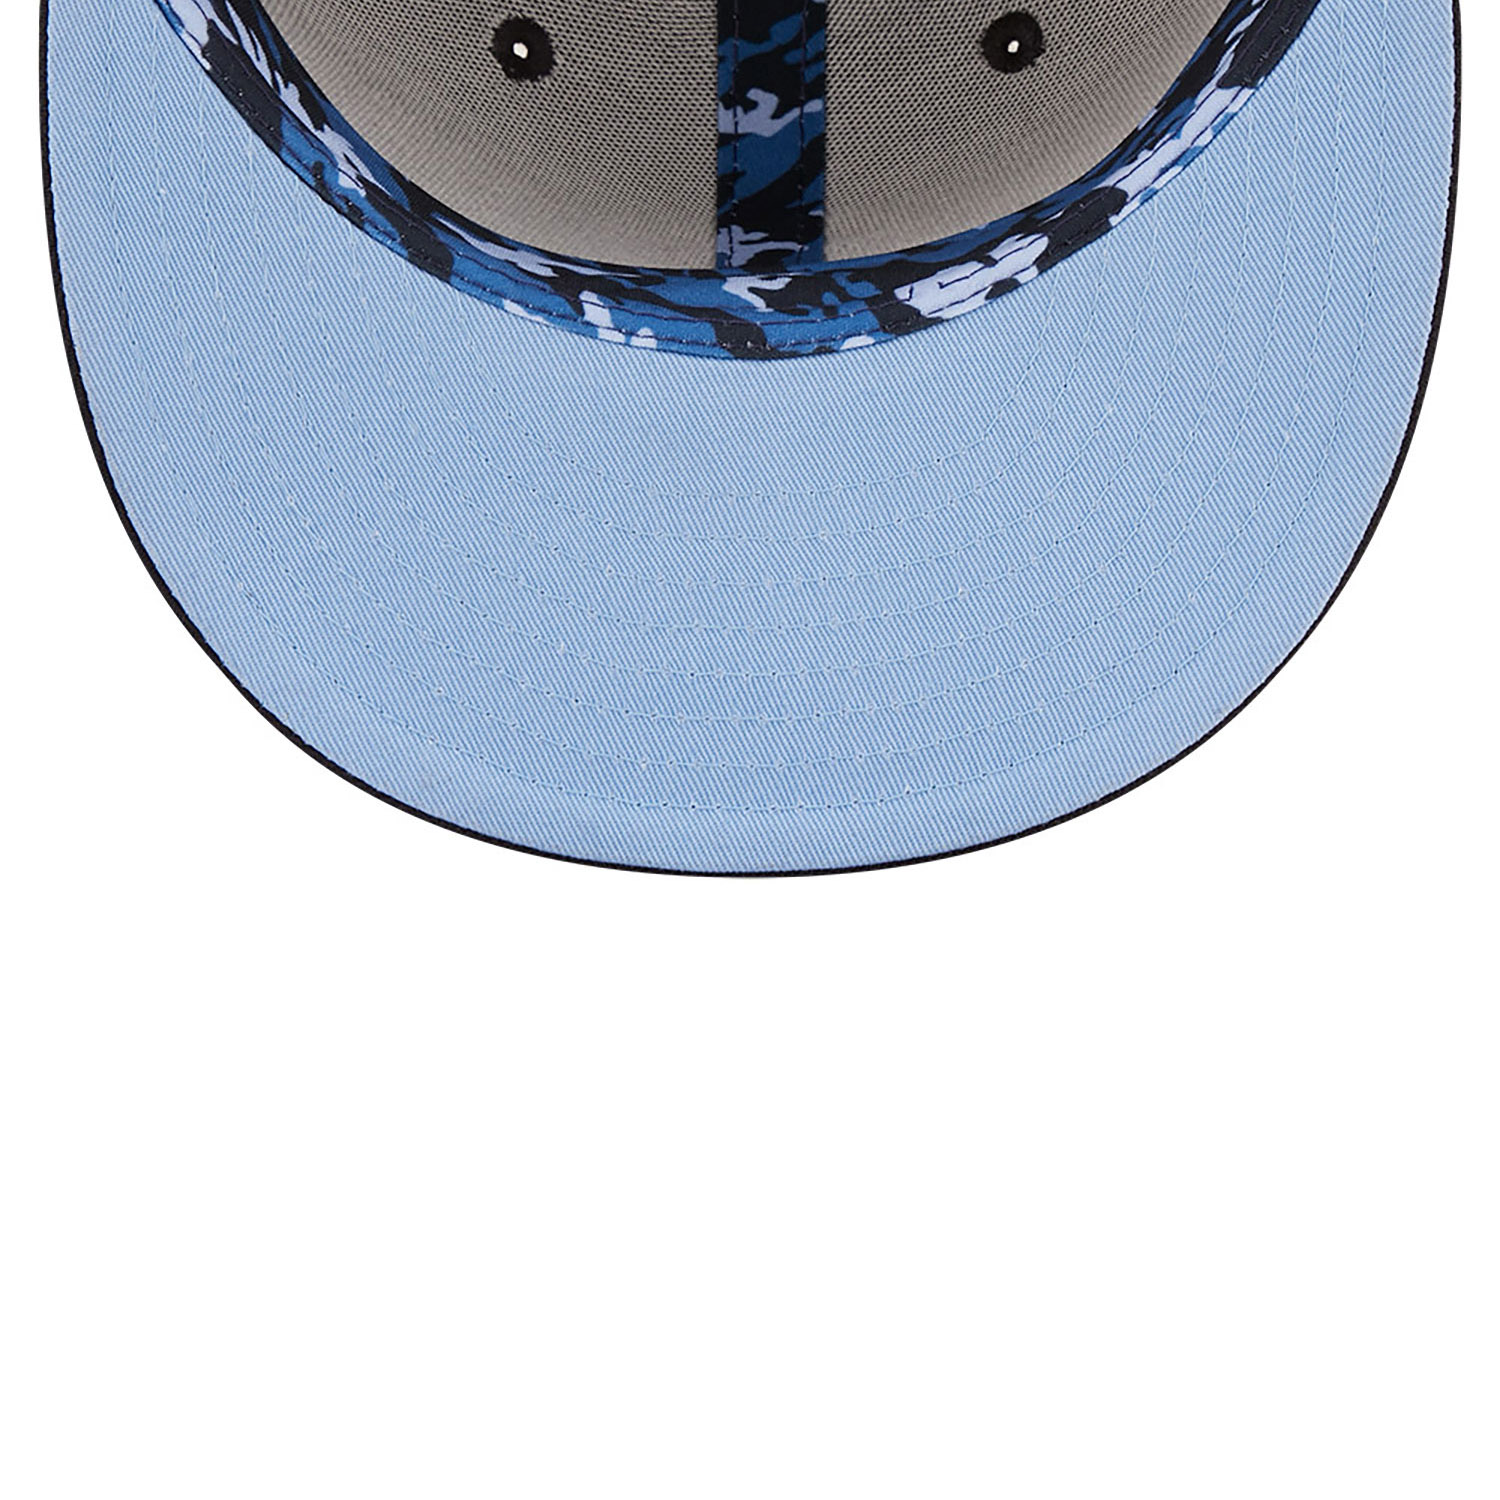 Minnesota Twins Monocamo Navy 59FIFTY Fitted Cap